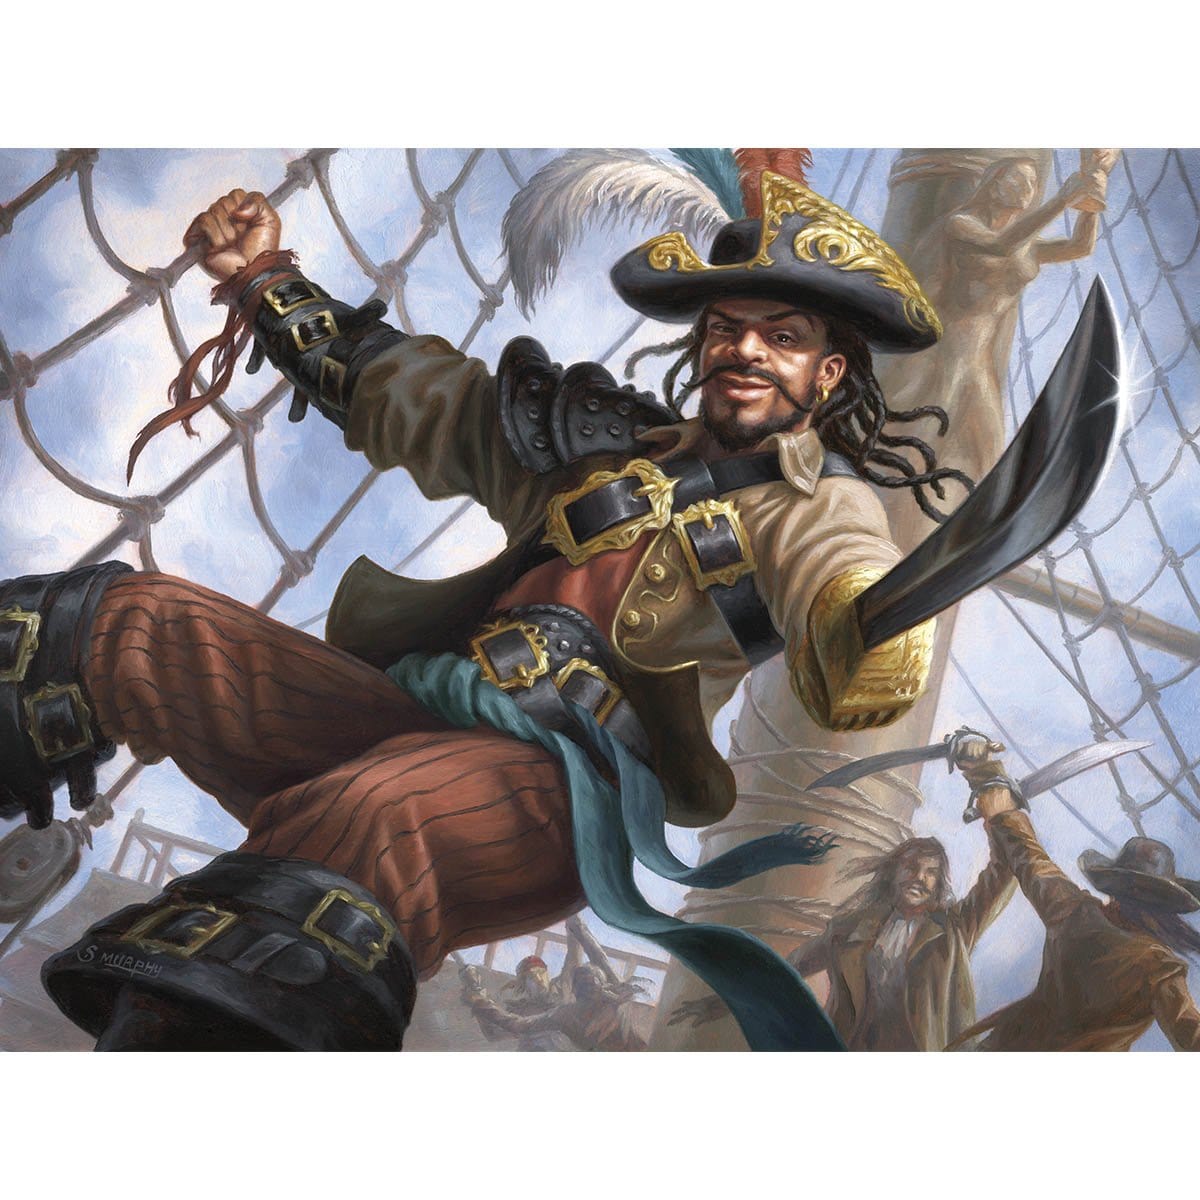 Swaggering Corsair Print - Print - Original Magic Art - Accessories for Magic the Gathering and other card games